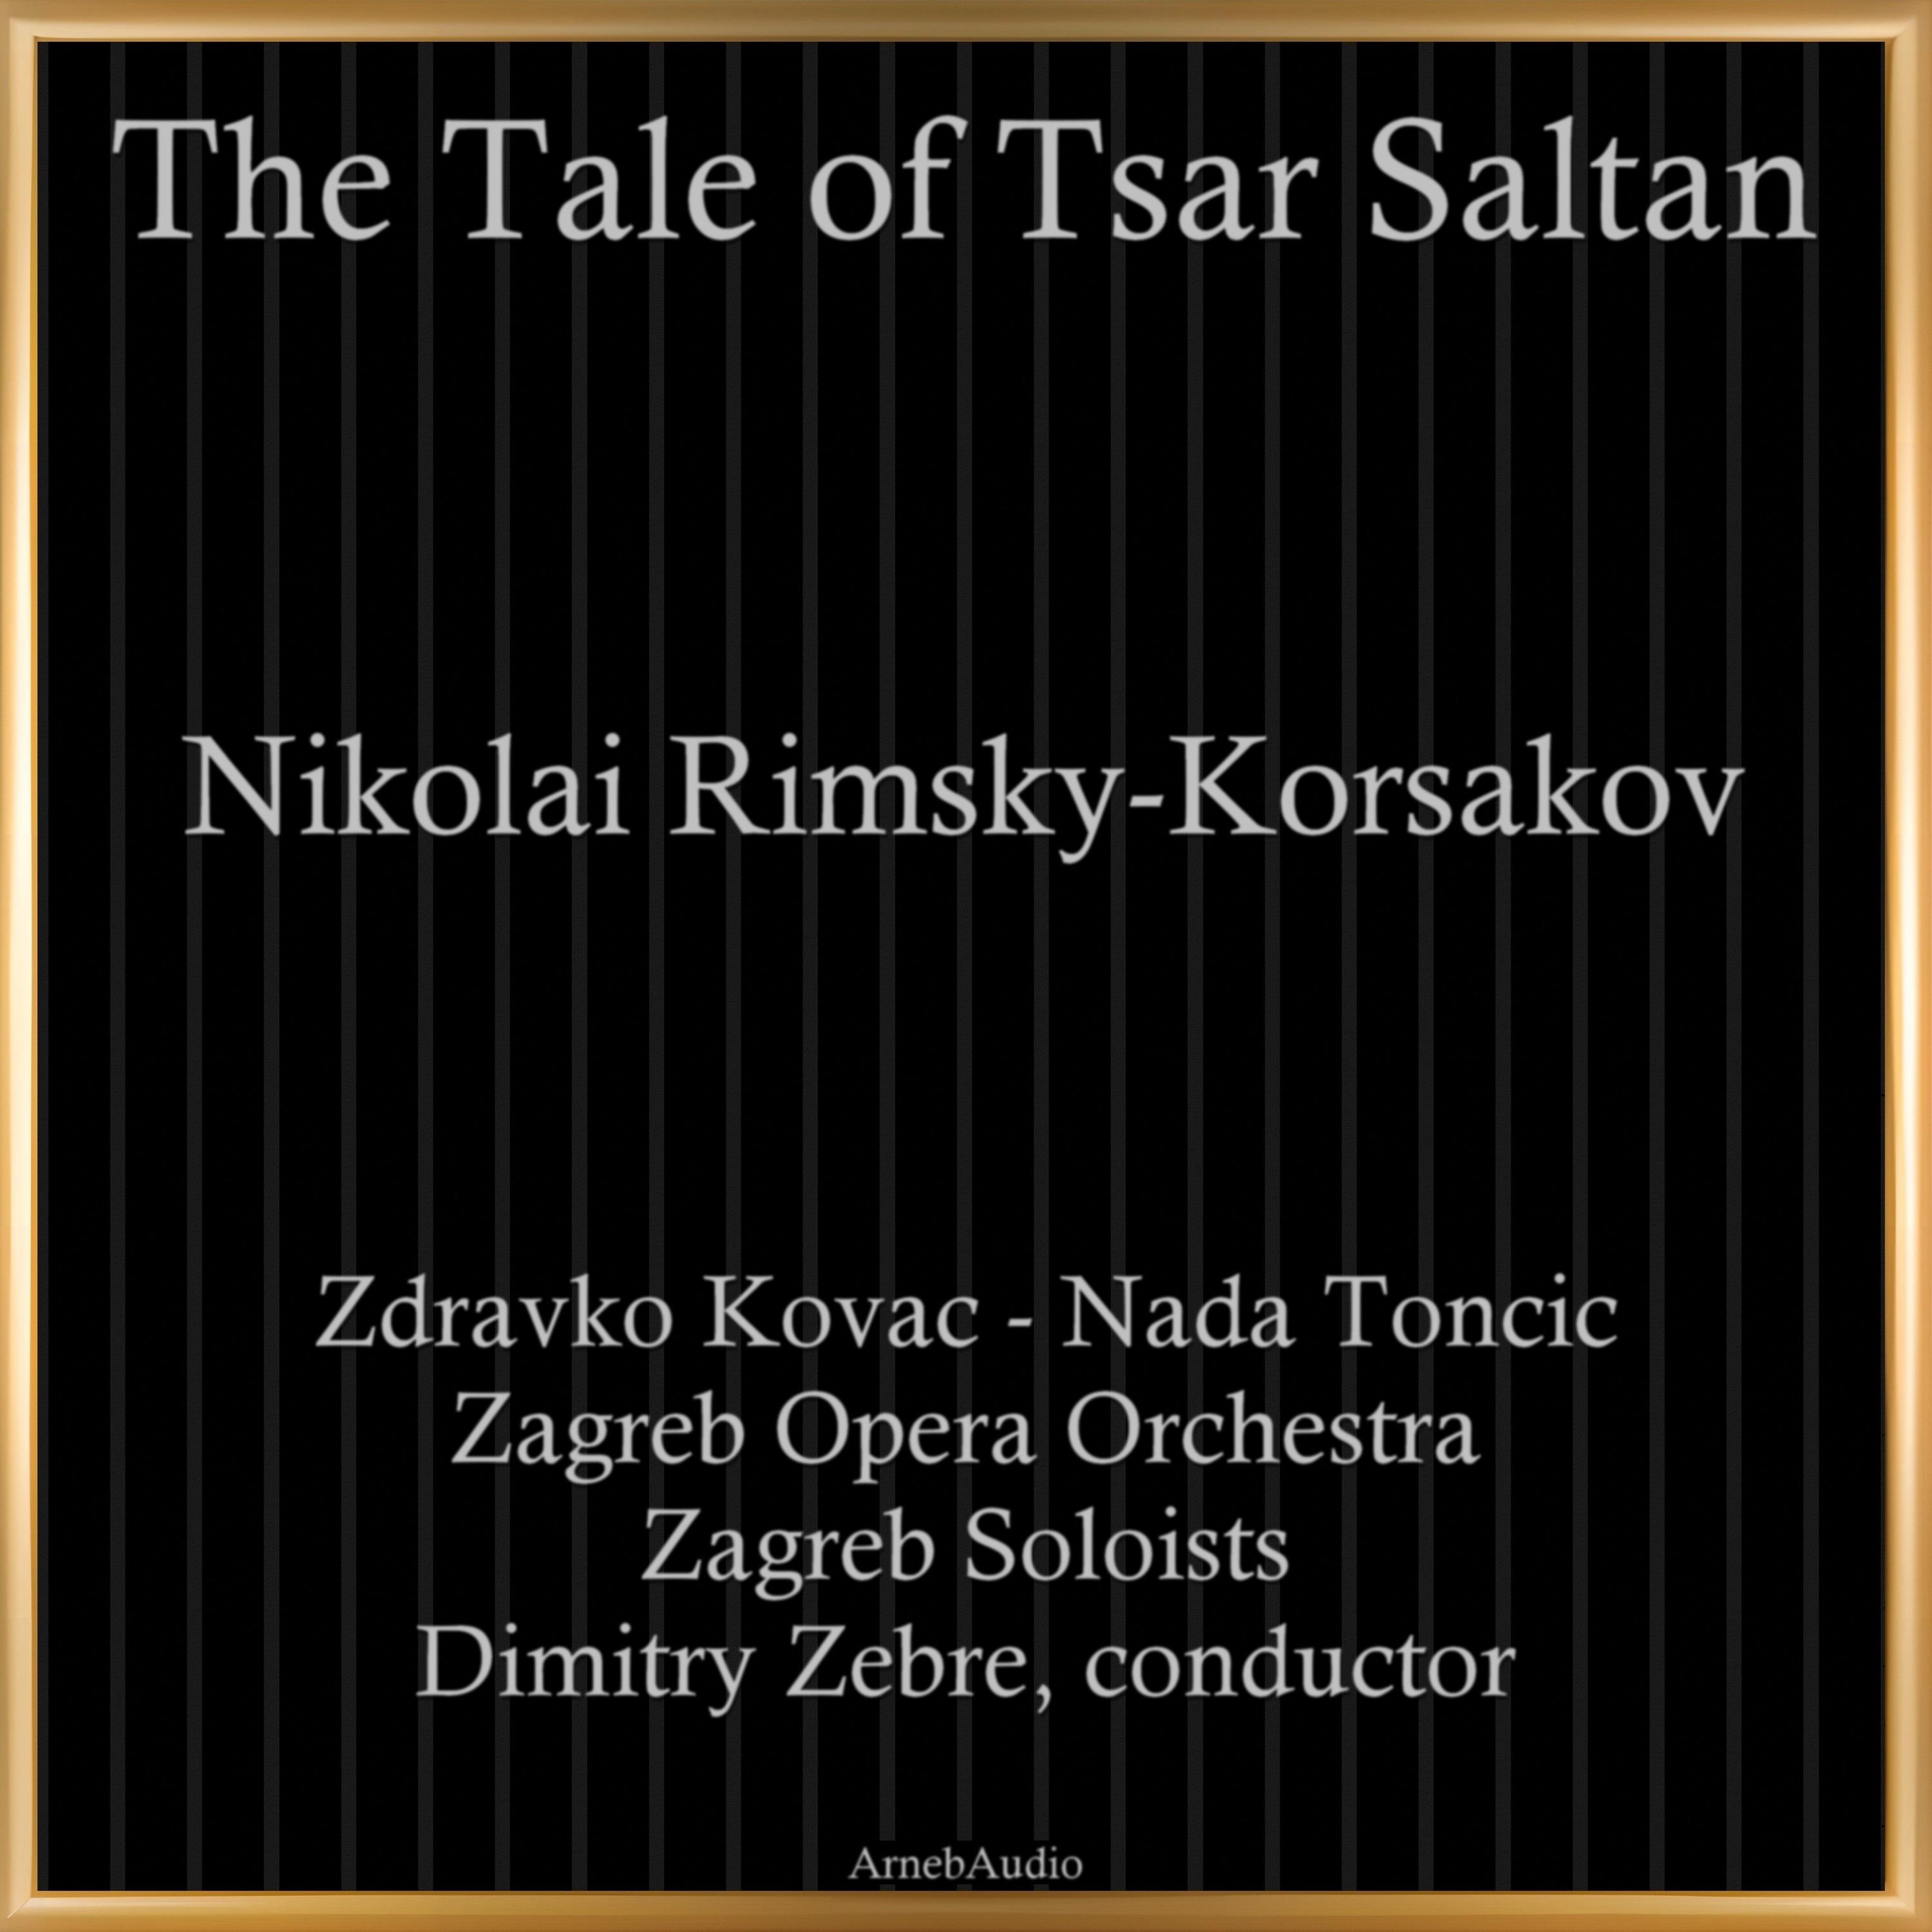 Zagreb Opera Orchestra - The Tale of Tsar Saltan, INR 79, Act IV: